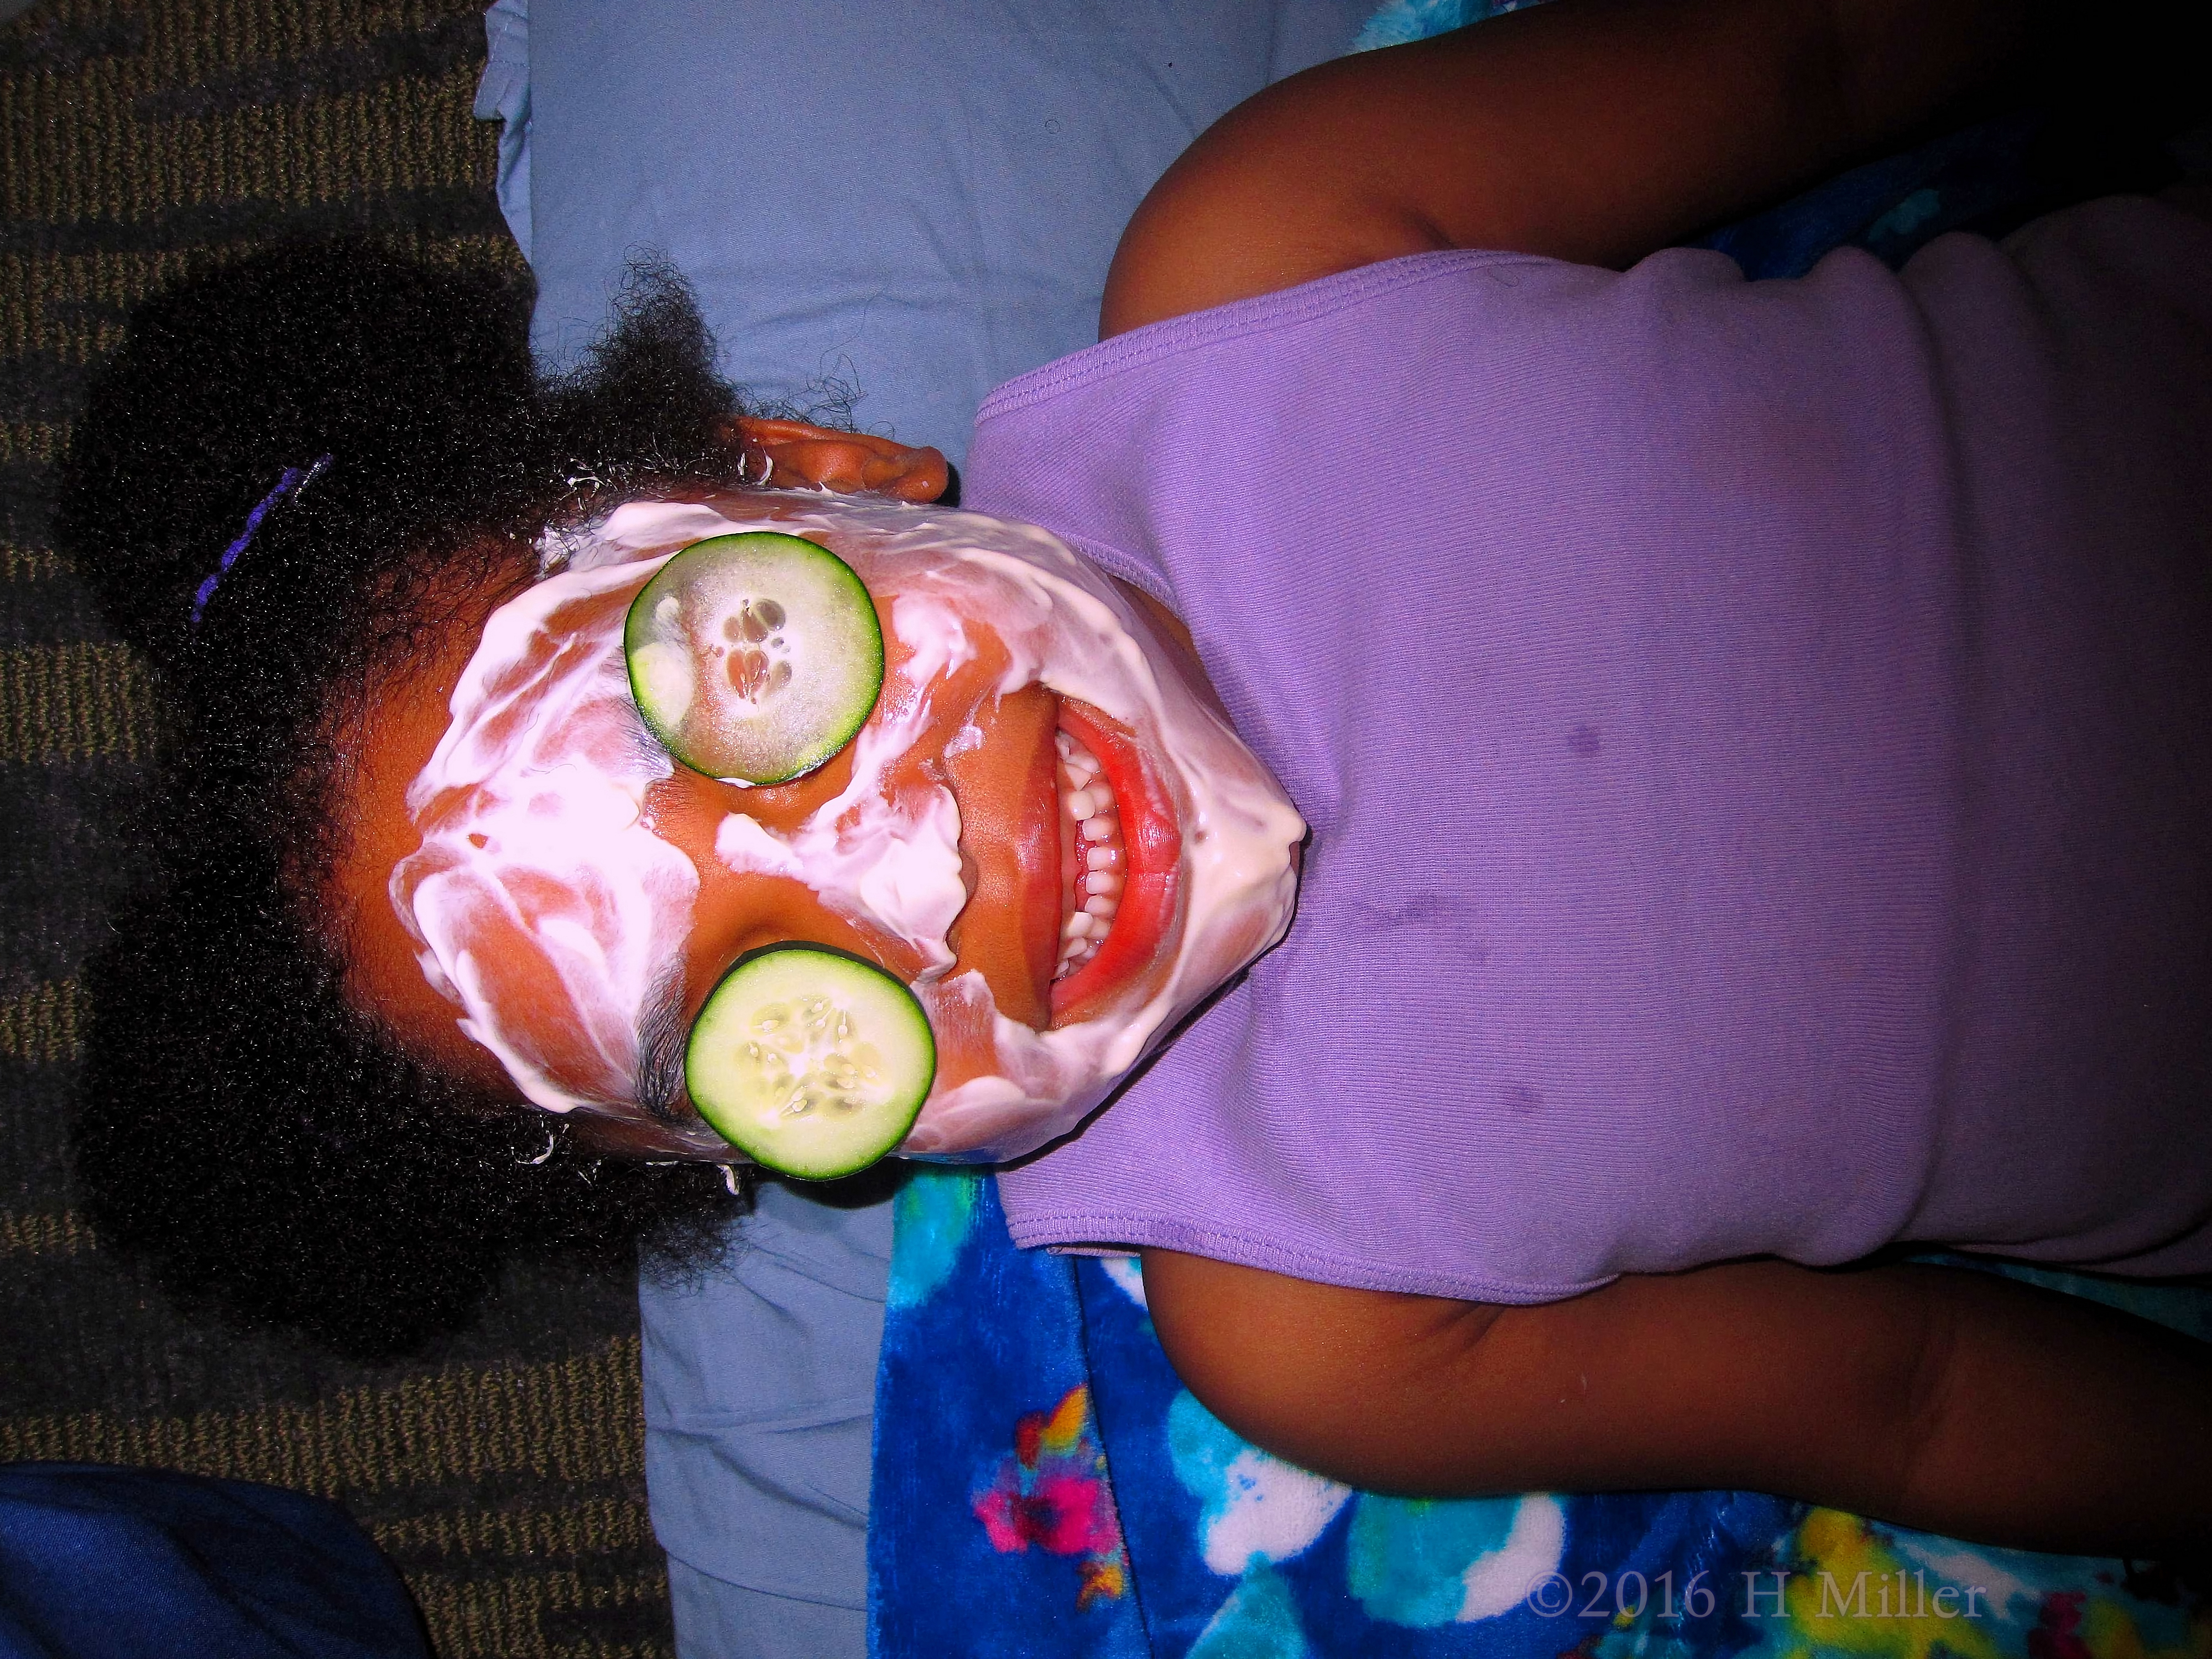 Kids Facials With Face Masque And Cucumbers On The Eyes. 